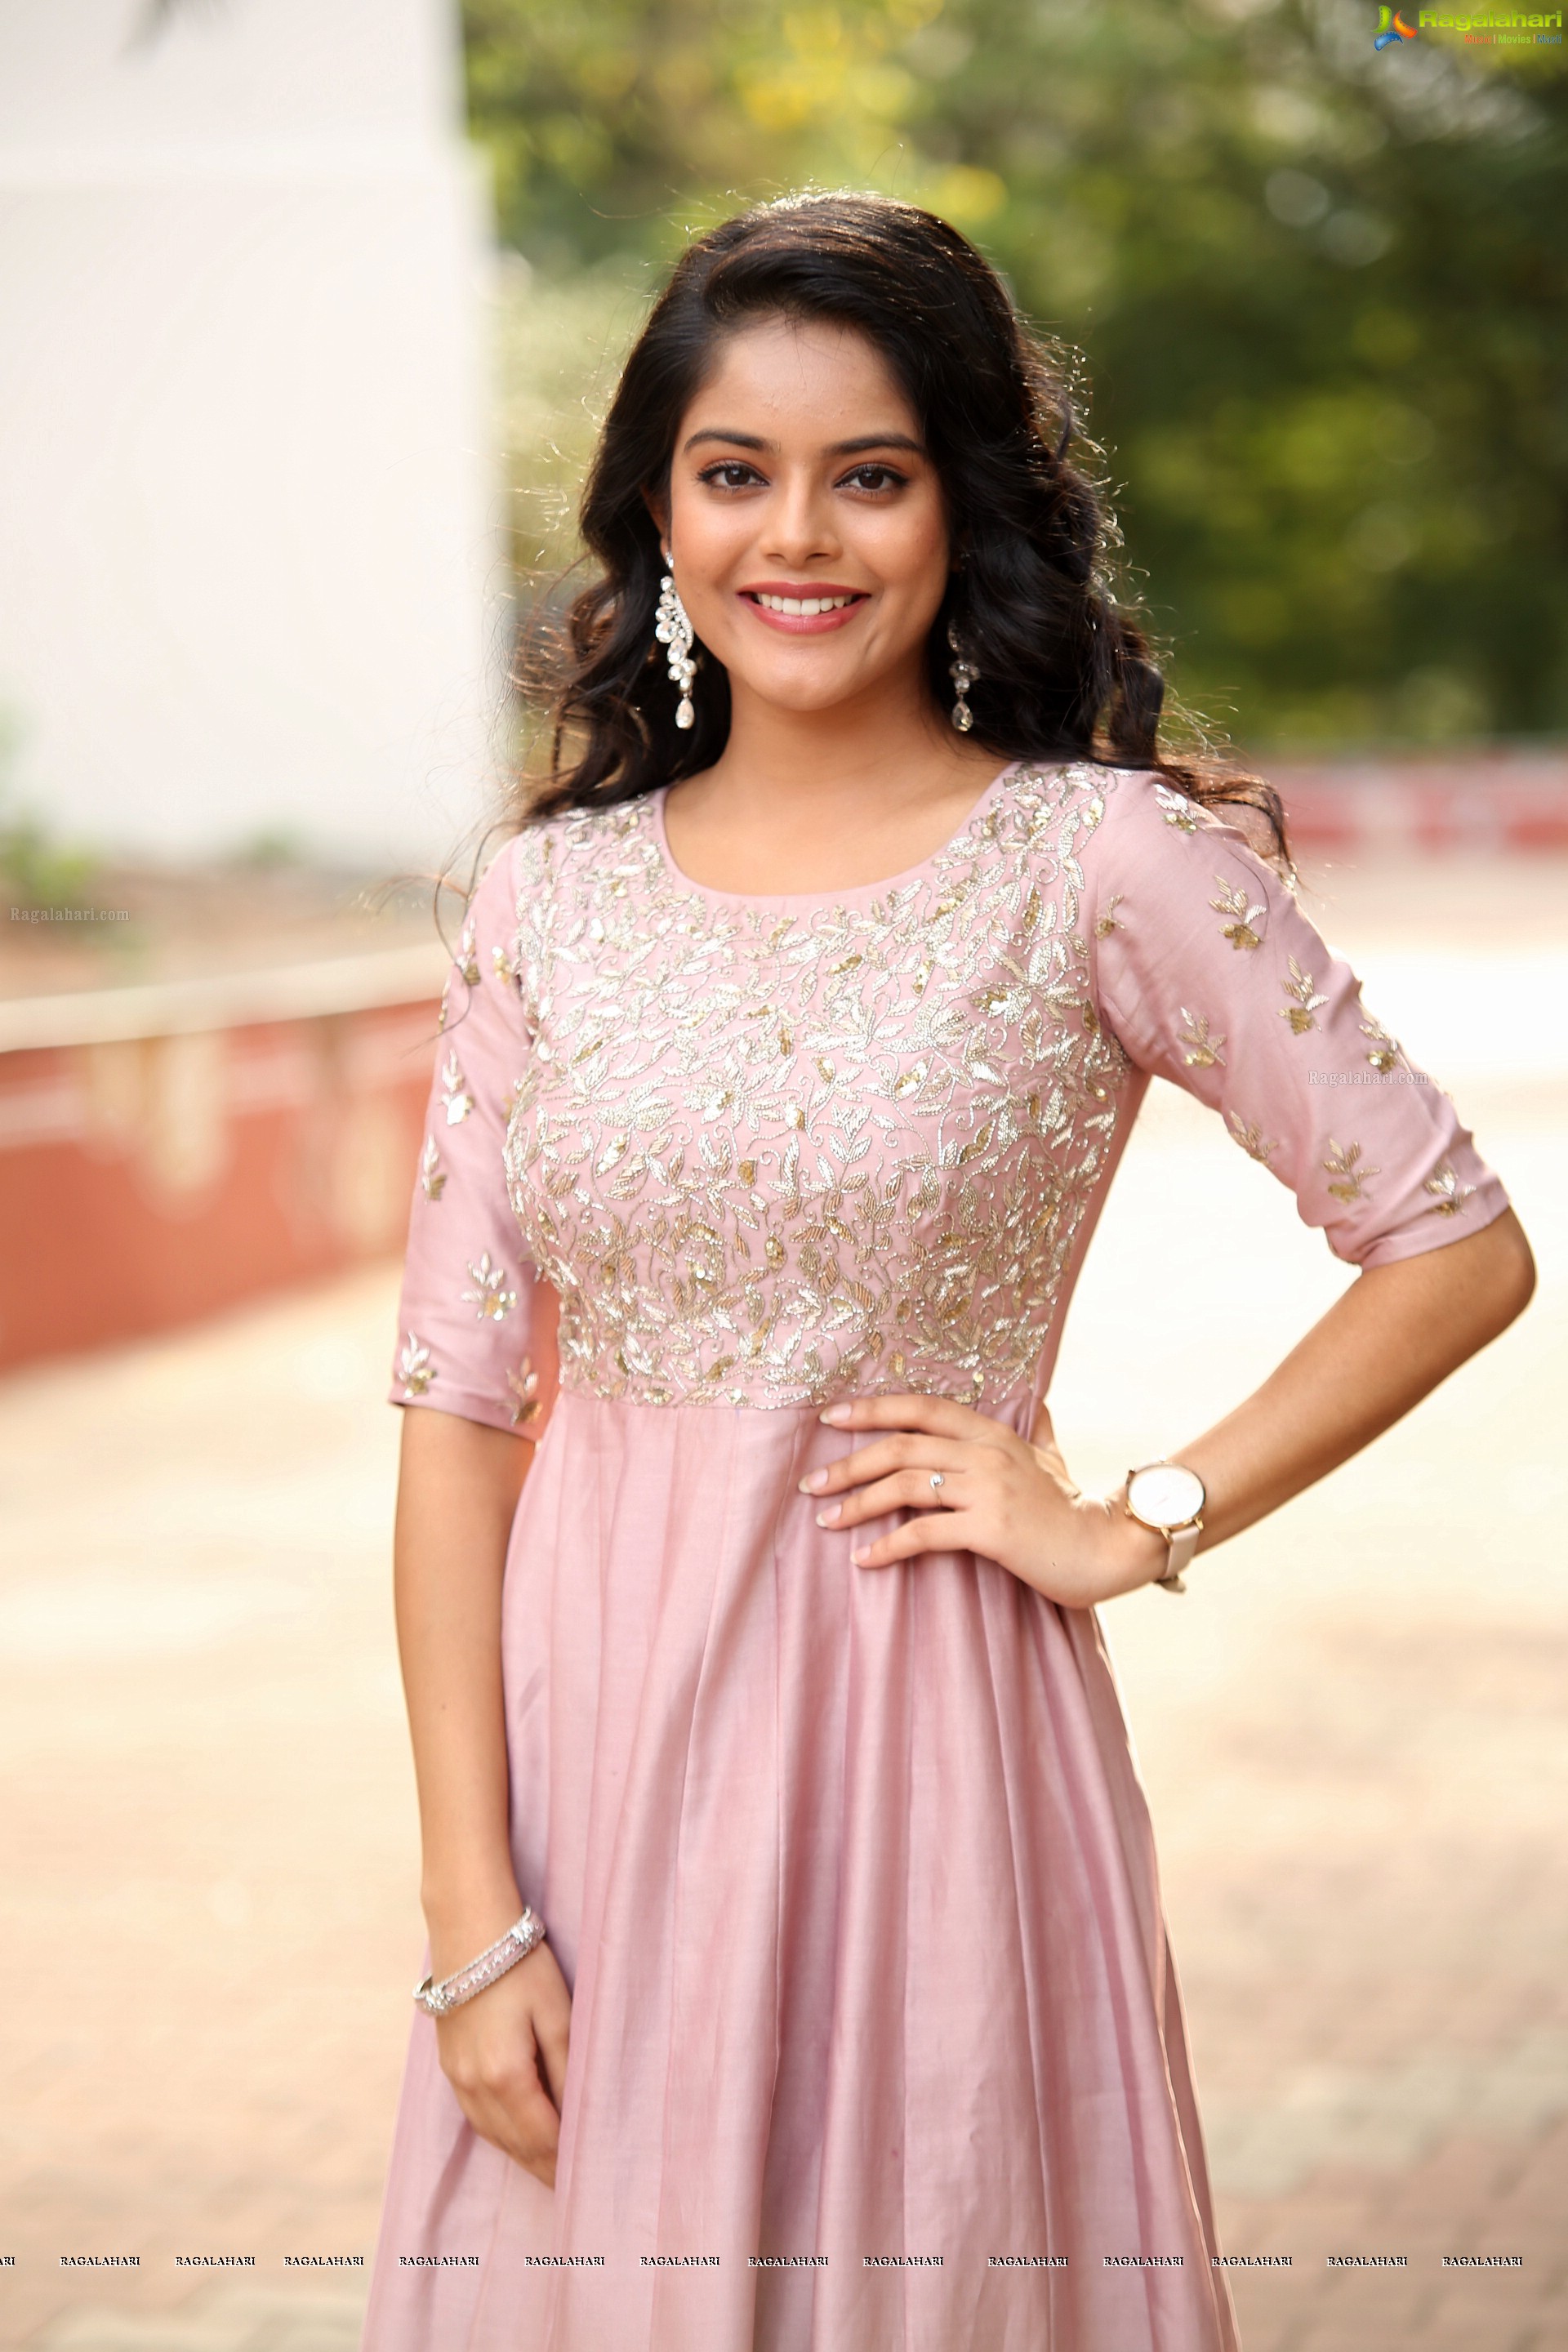 Riddhi Kumar at Lover Audio Release (High Definition)